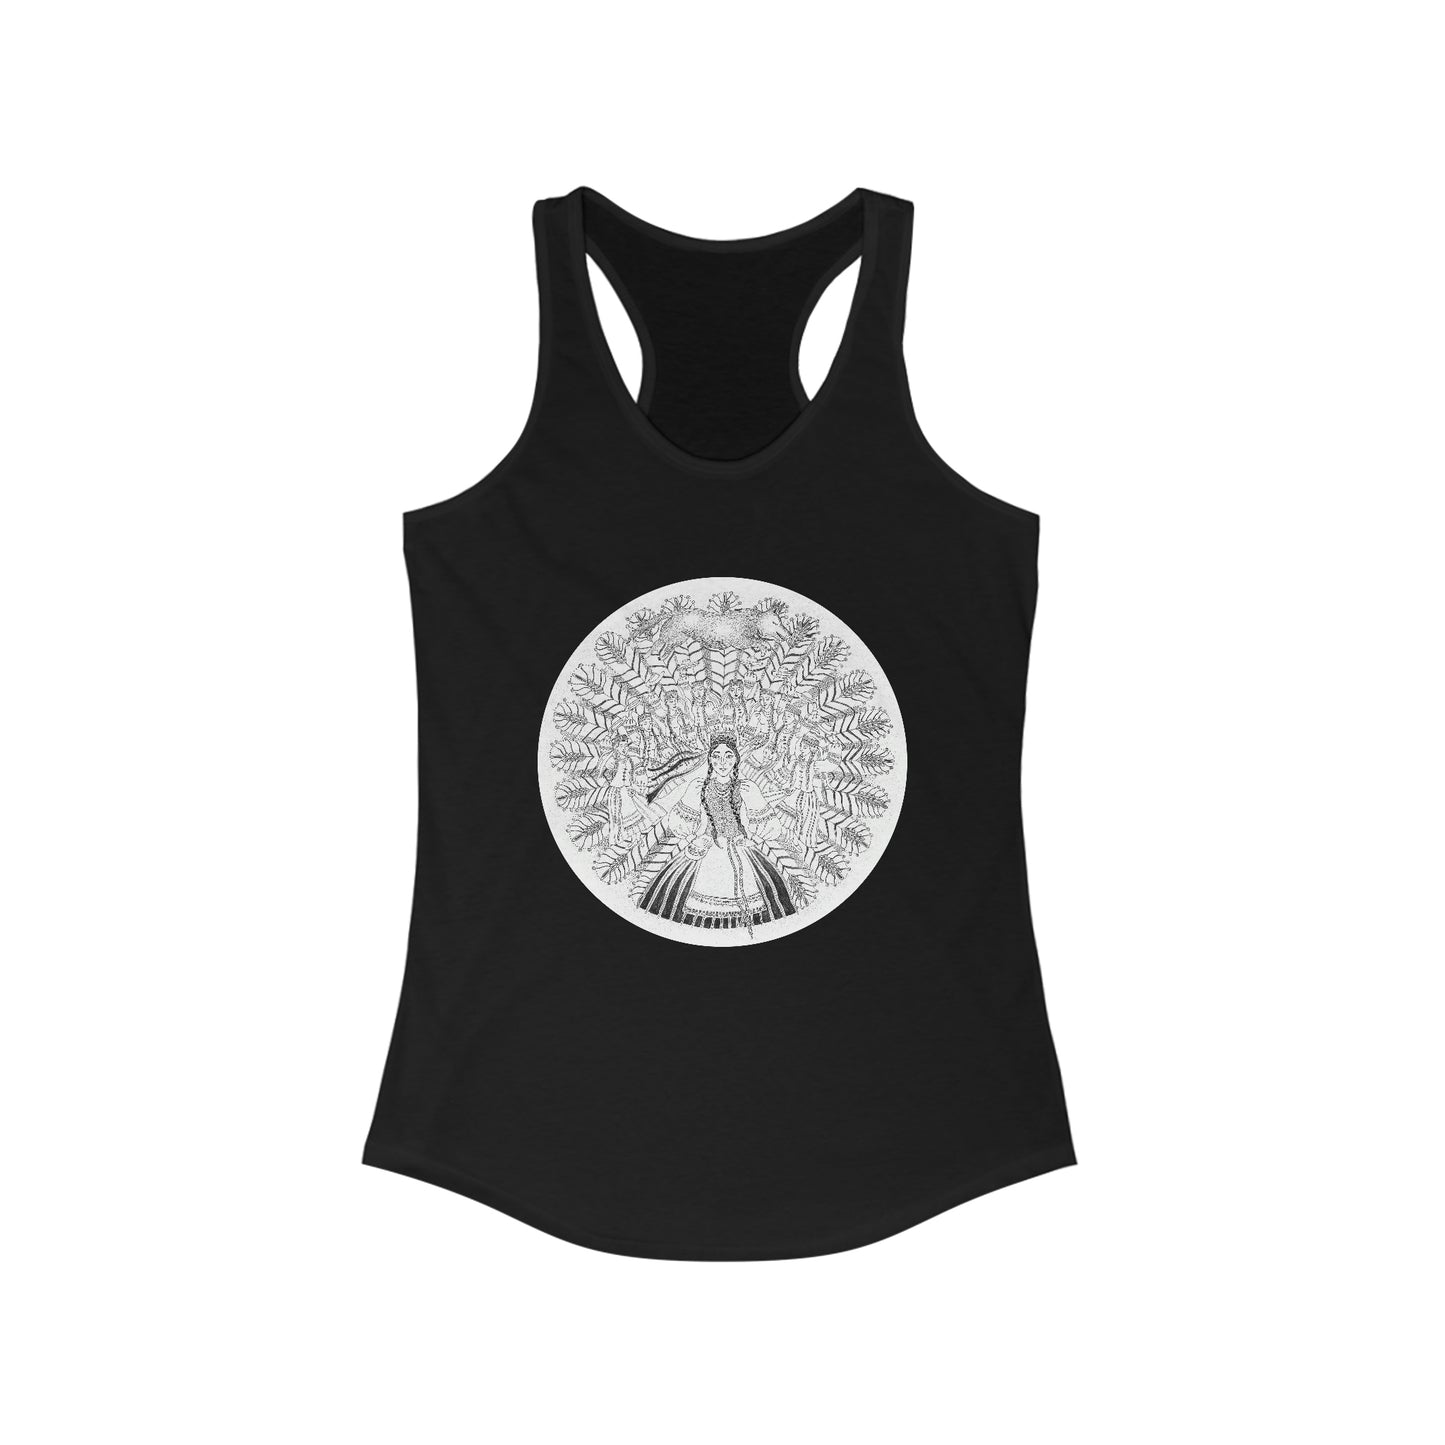 Chinese Zodiac Sign Tank Top (Dog) Limited Edition